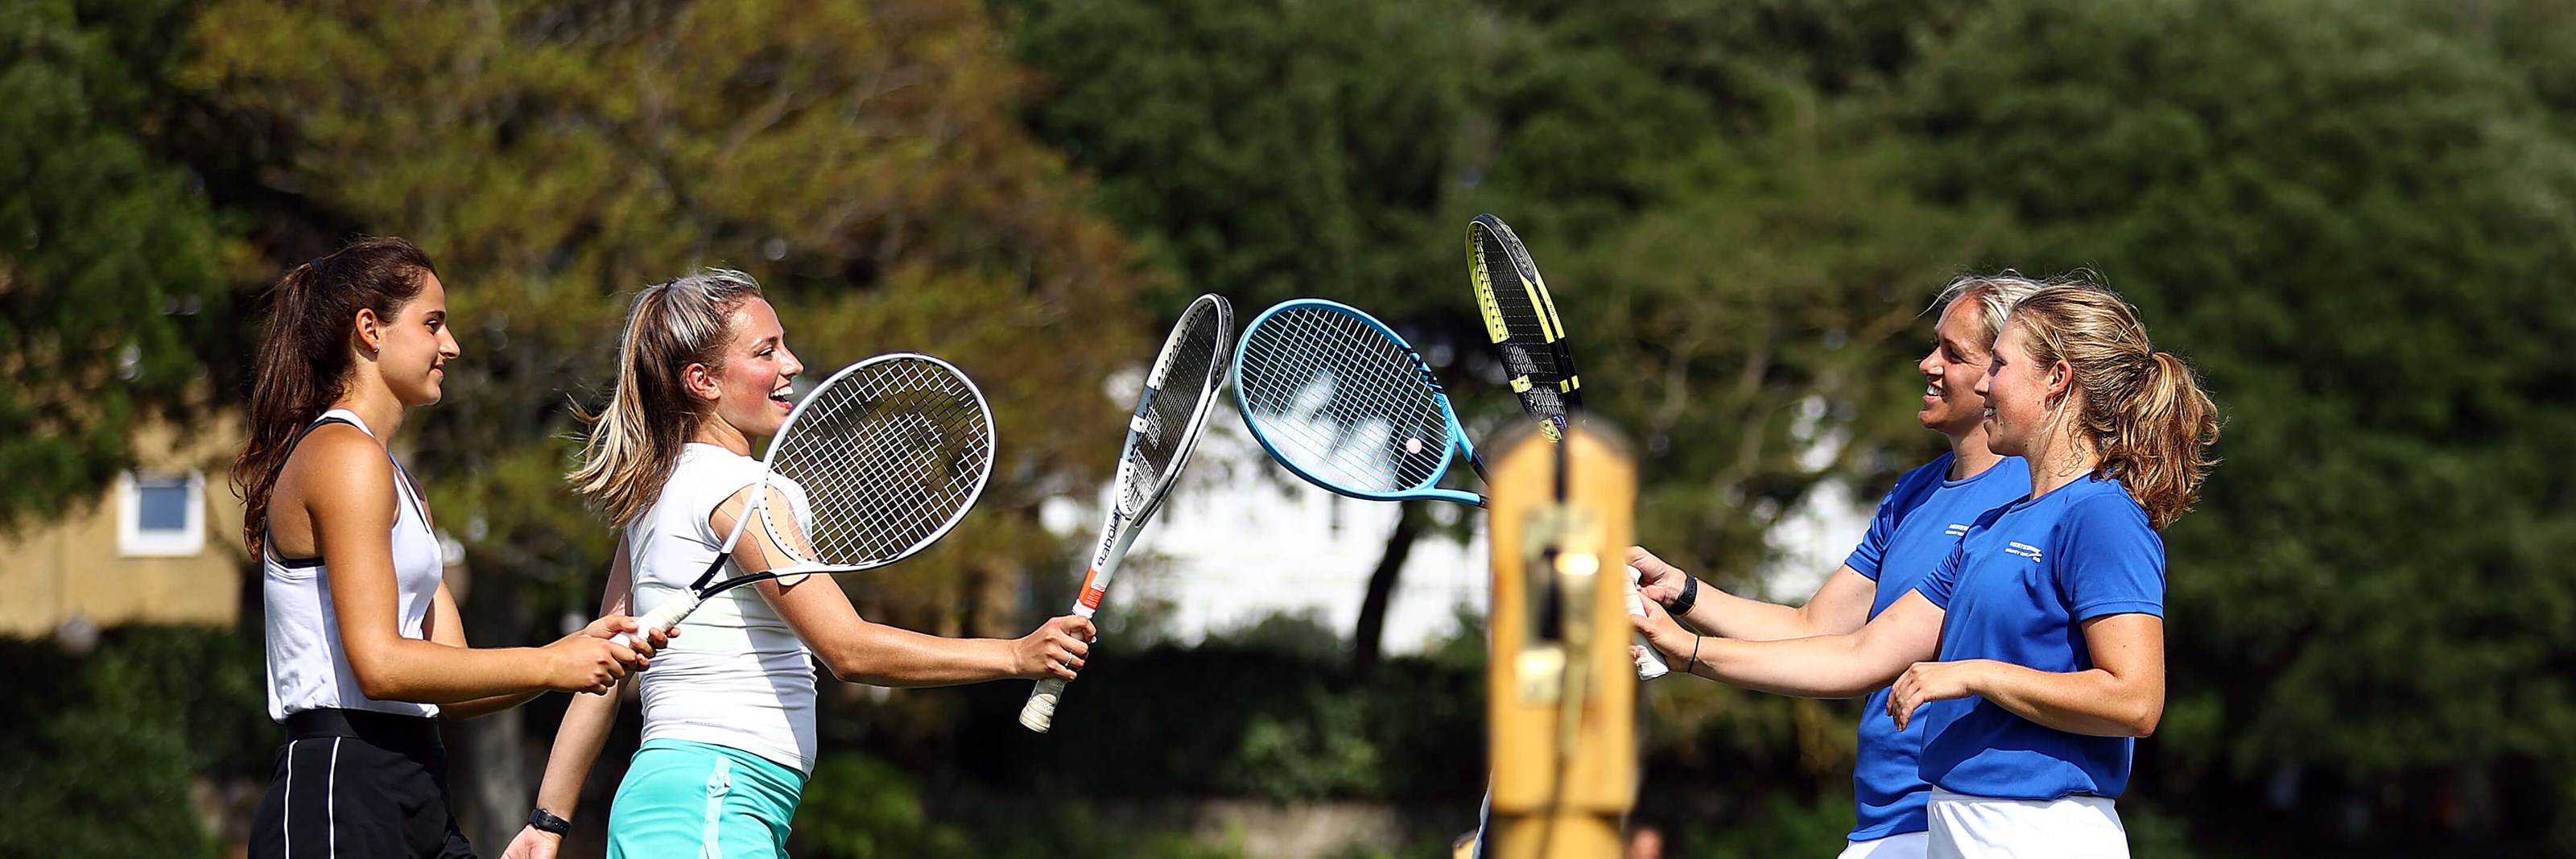 Doubles players tapping rackets over net at Devonshire Park Eastbourne